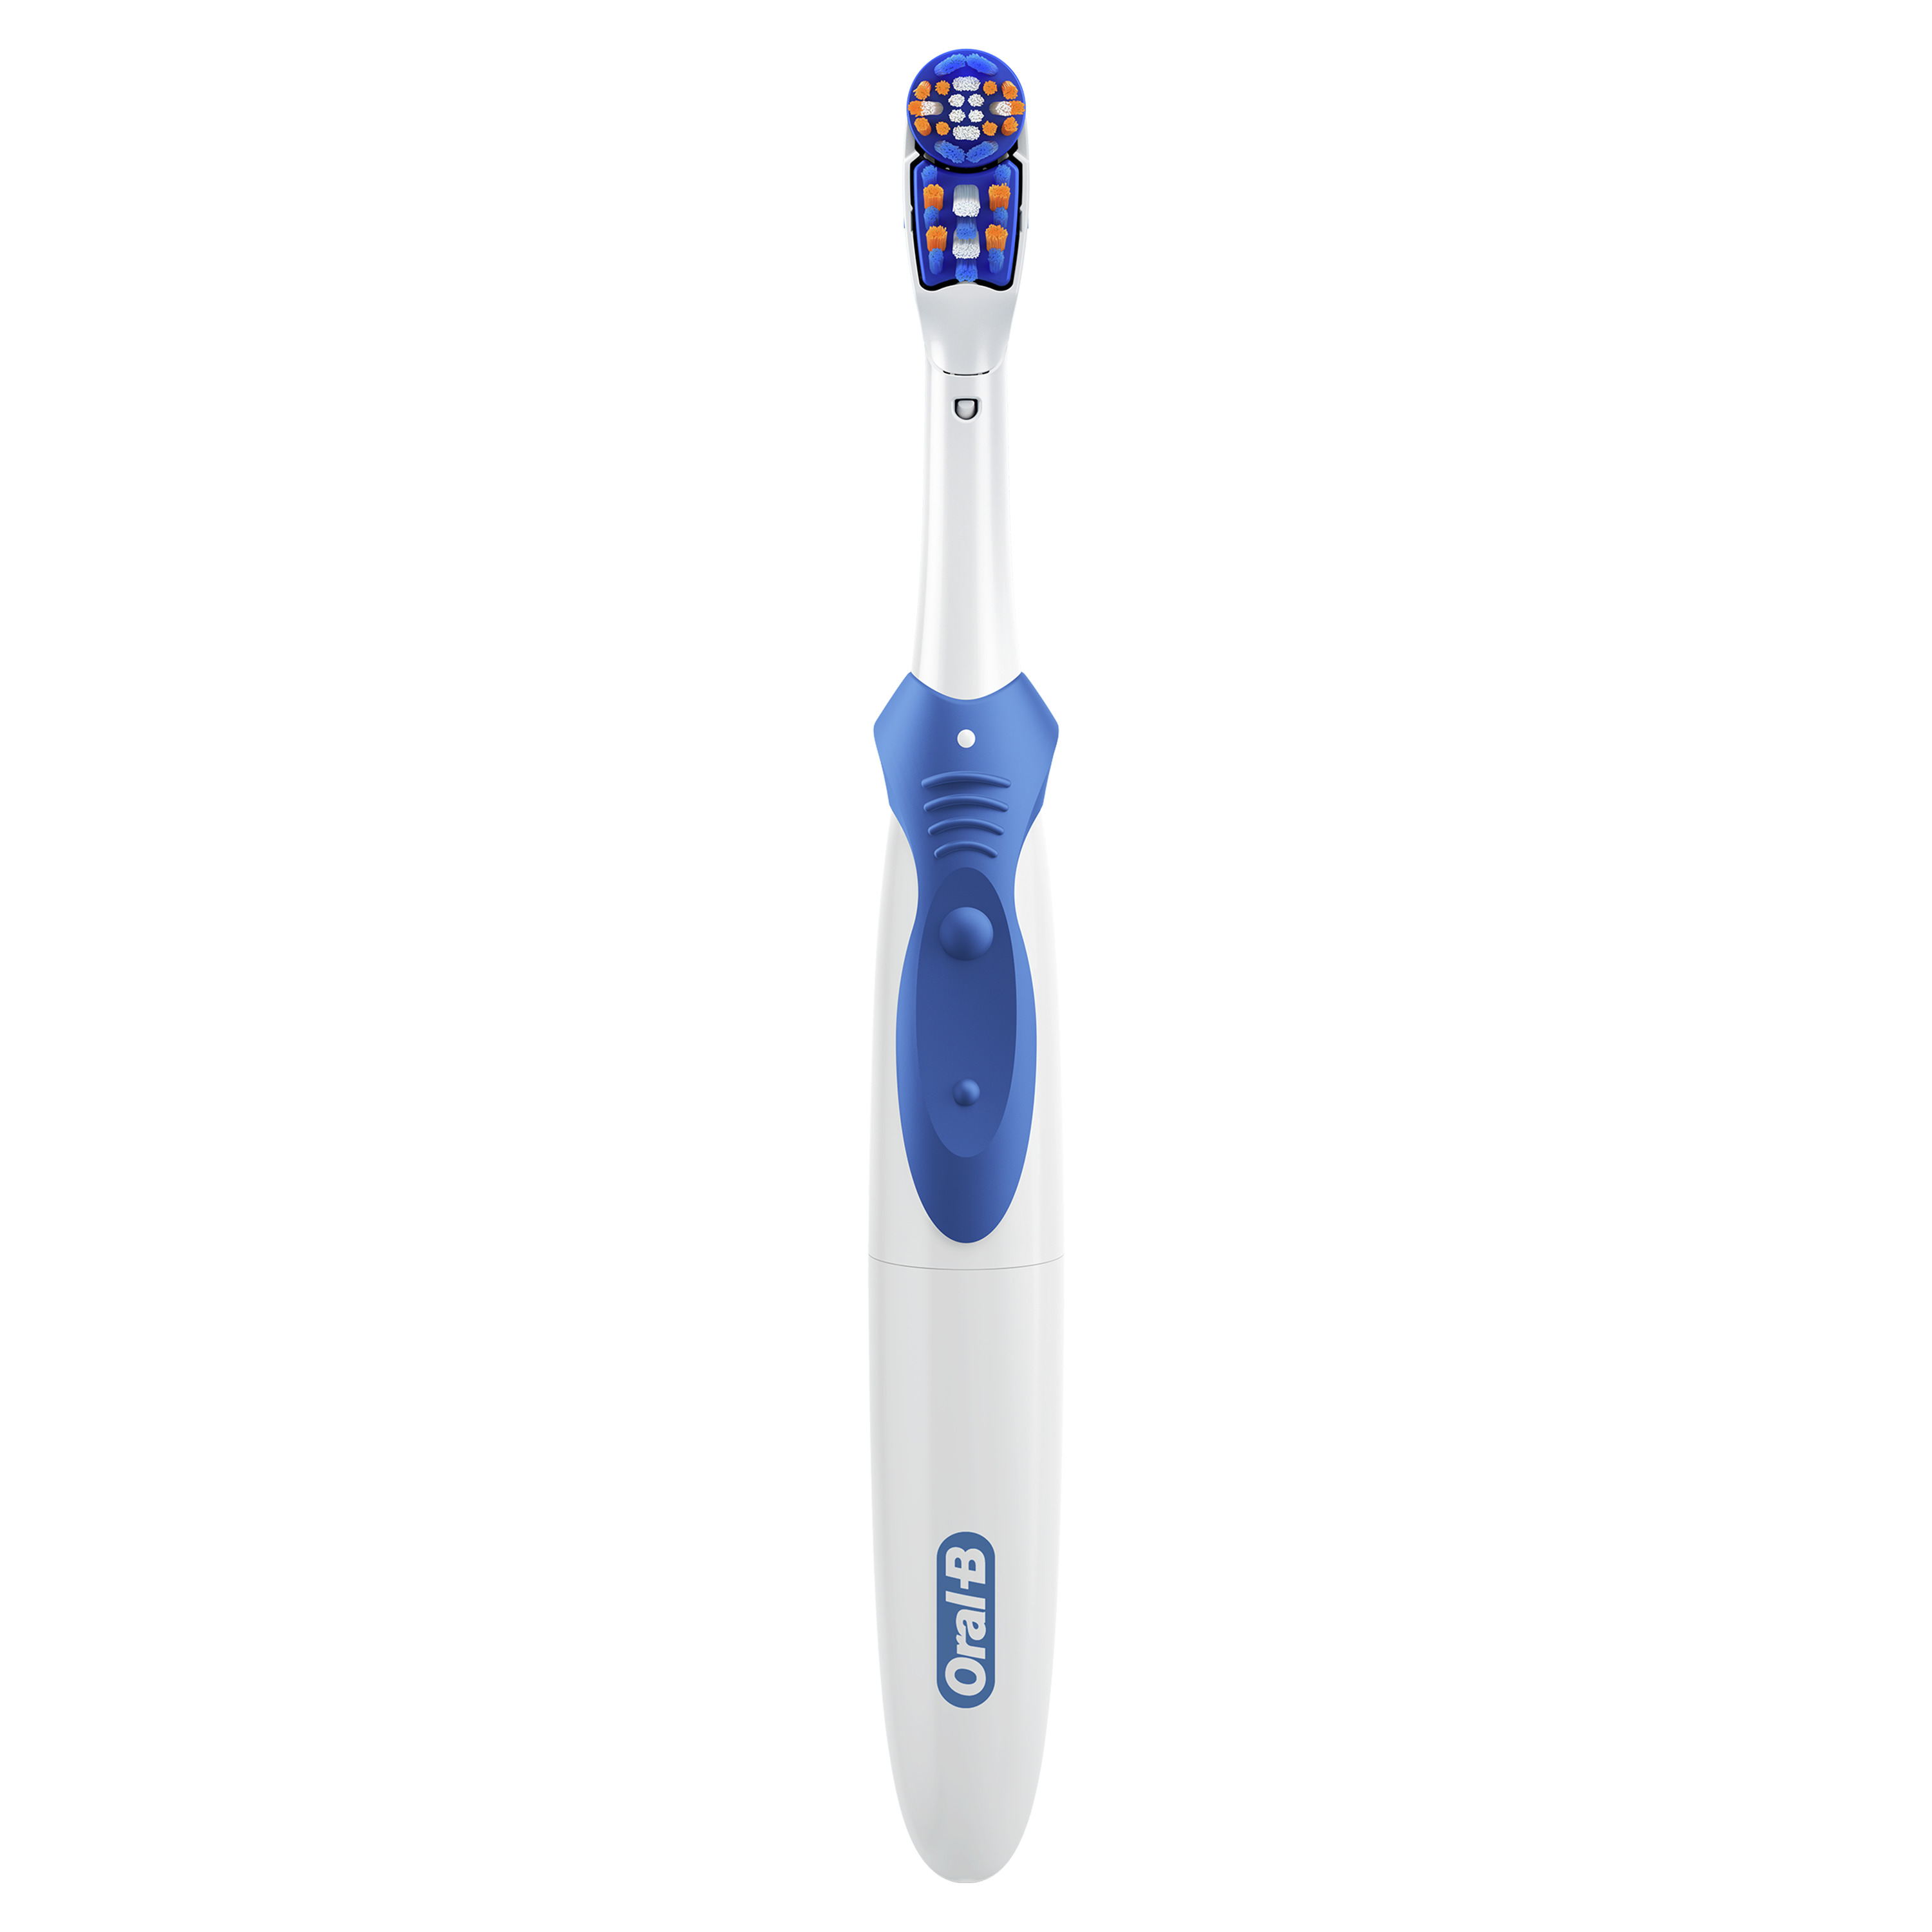 Oral-B 3D White Battery Toothbrush, 1 Count, Colors May Vary, for Adults and Children 3+ - image 9 of 9